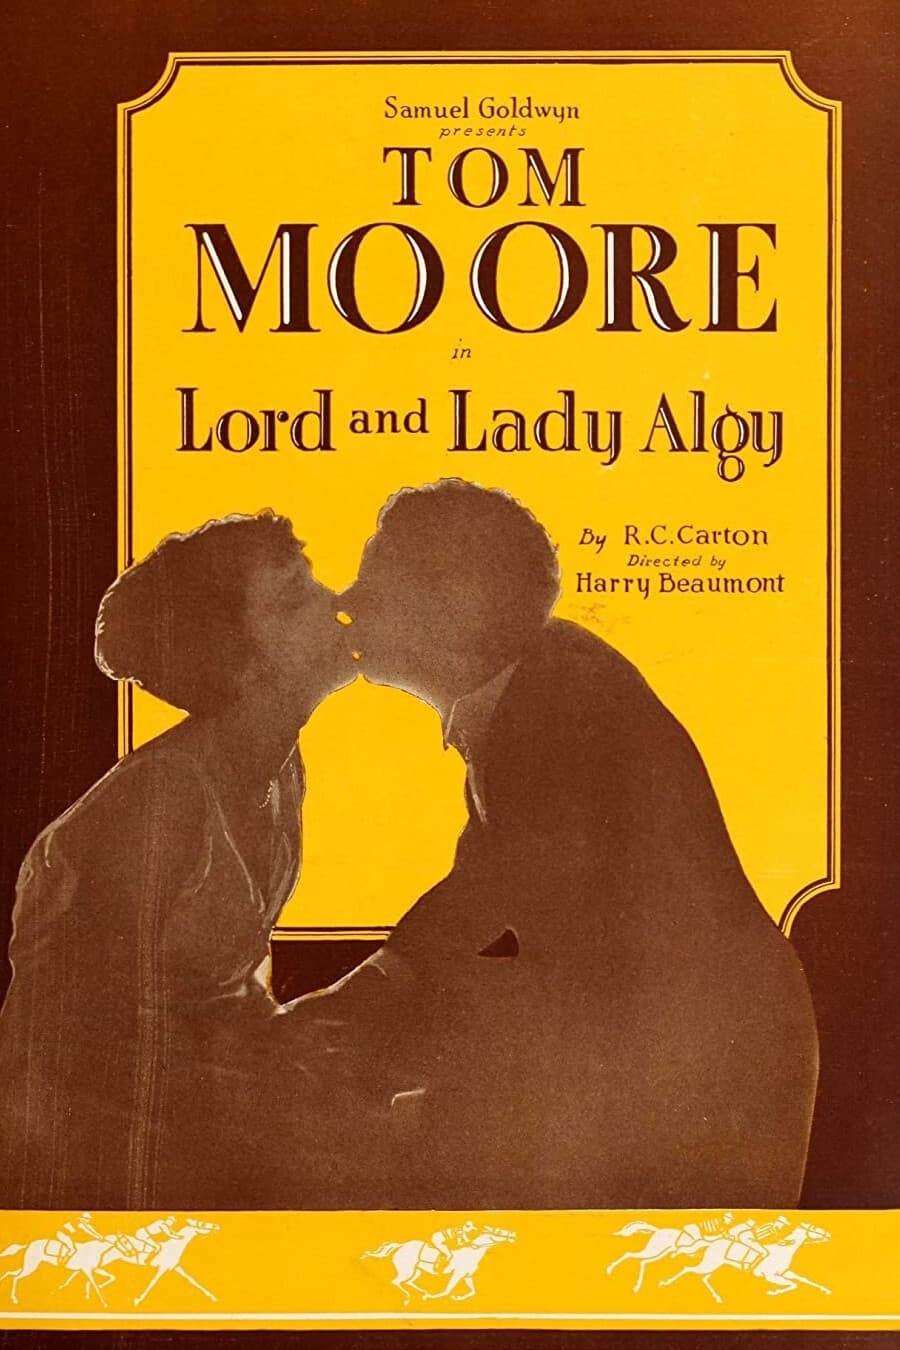 Lord and Lady Algy